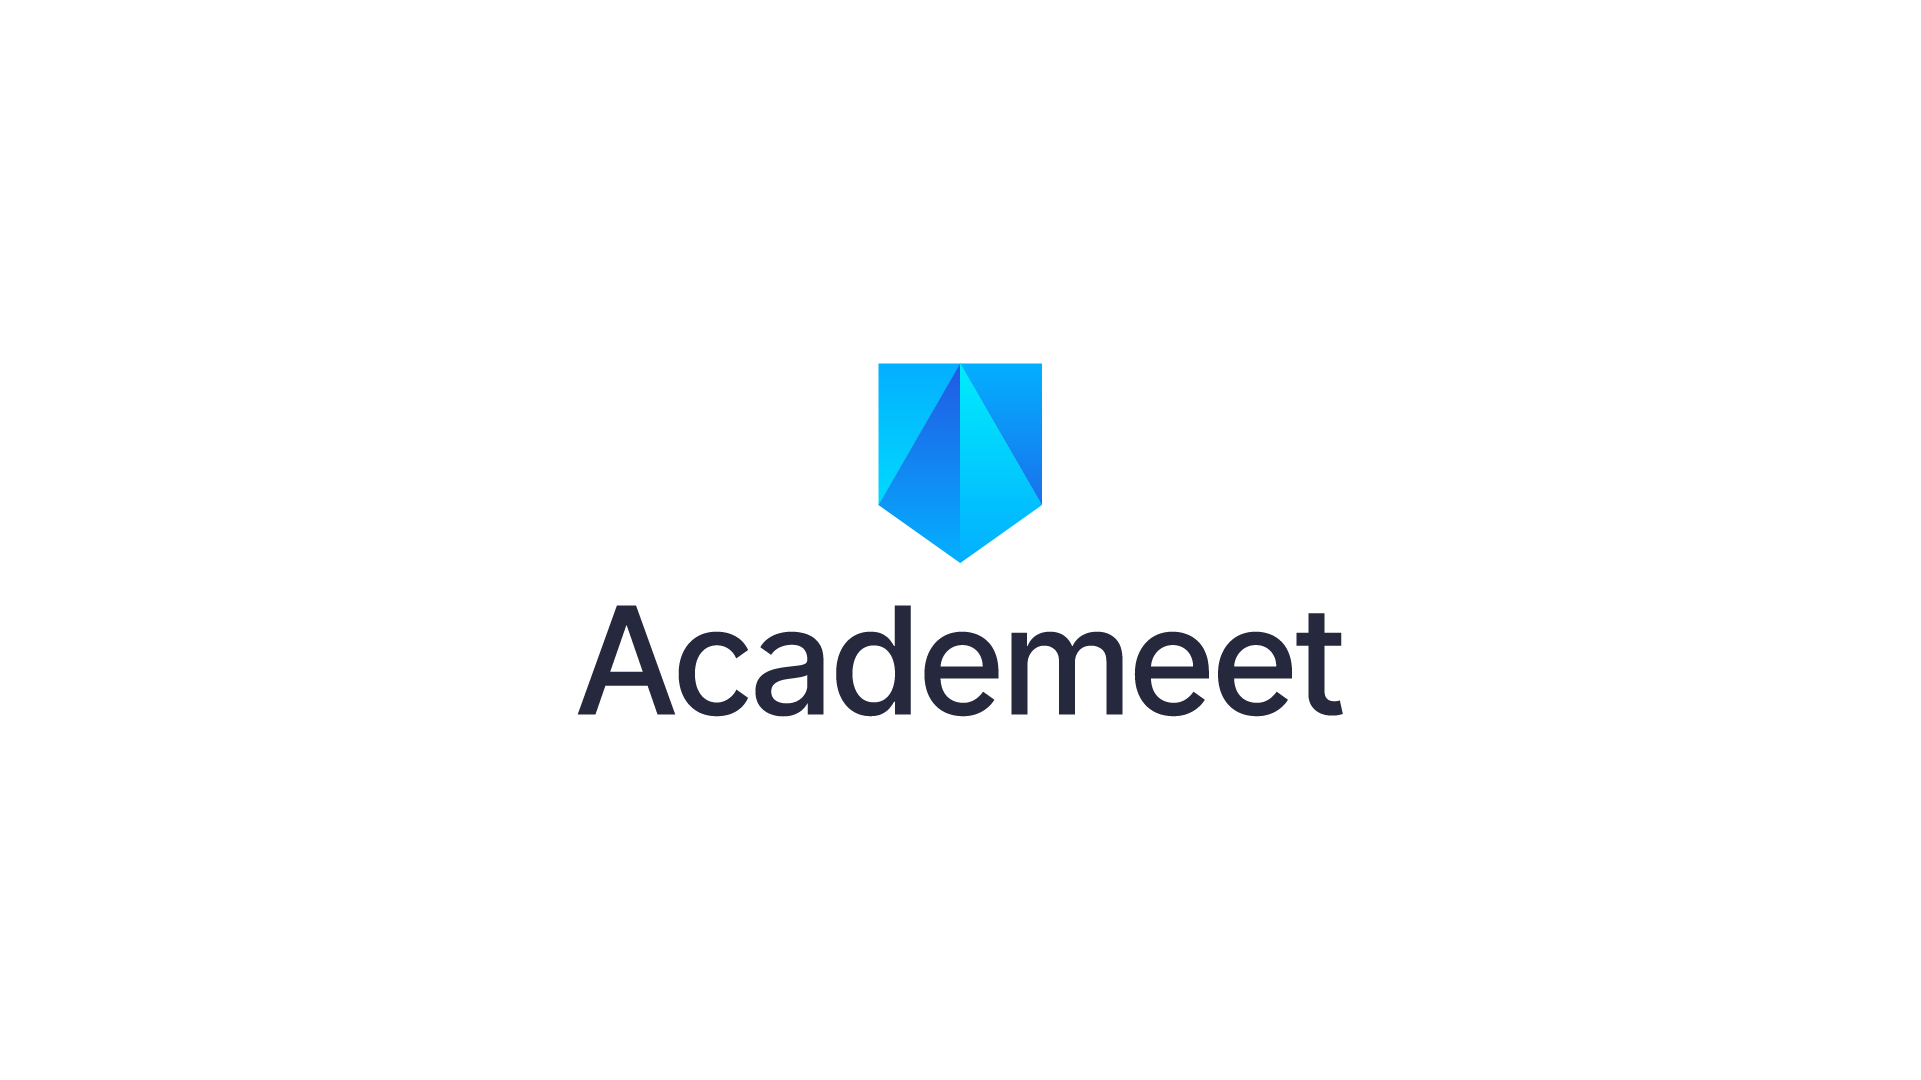 Academeet - Event Management Company logo, combining a shield with the letter 'A', symbolizing security and organization in event management